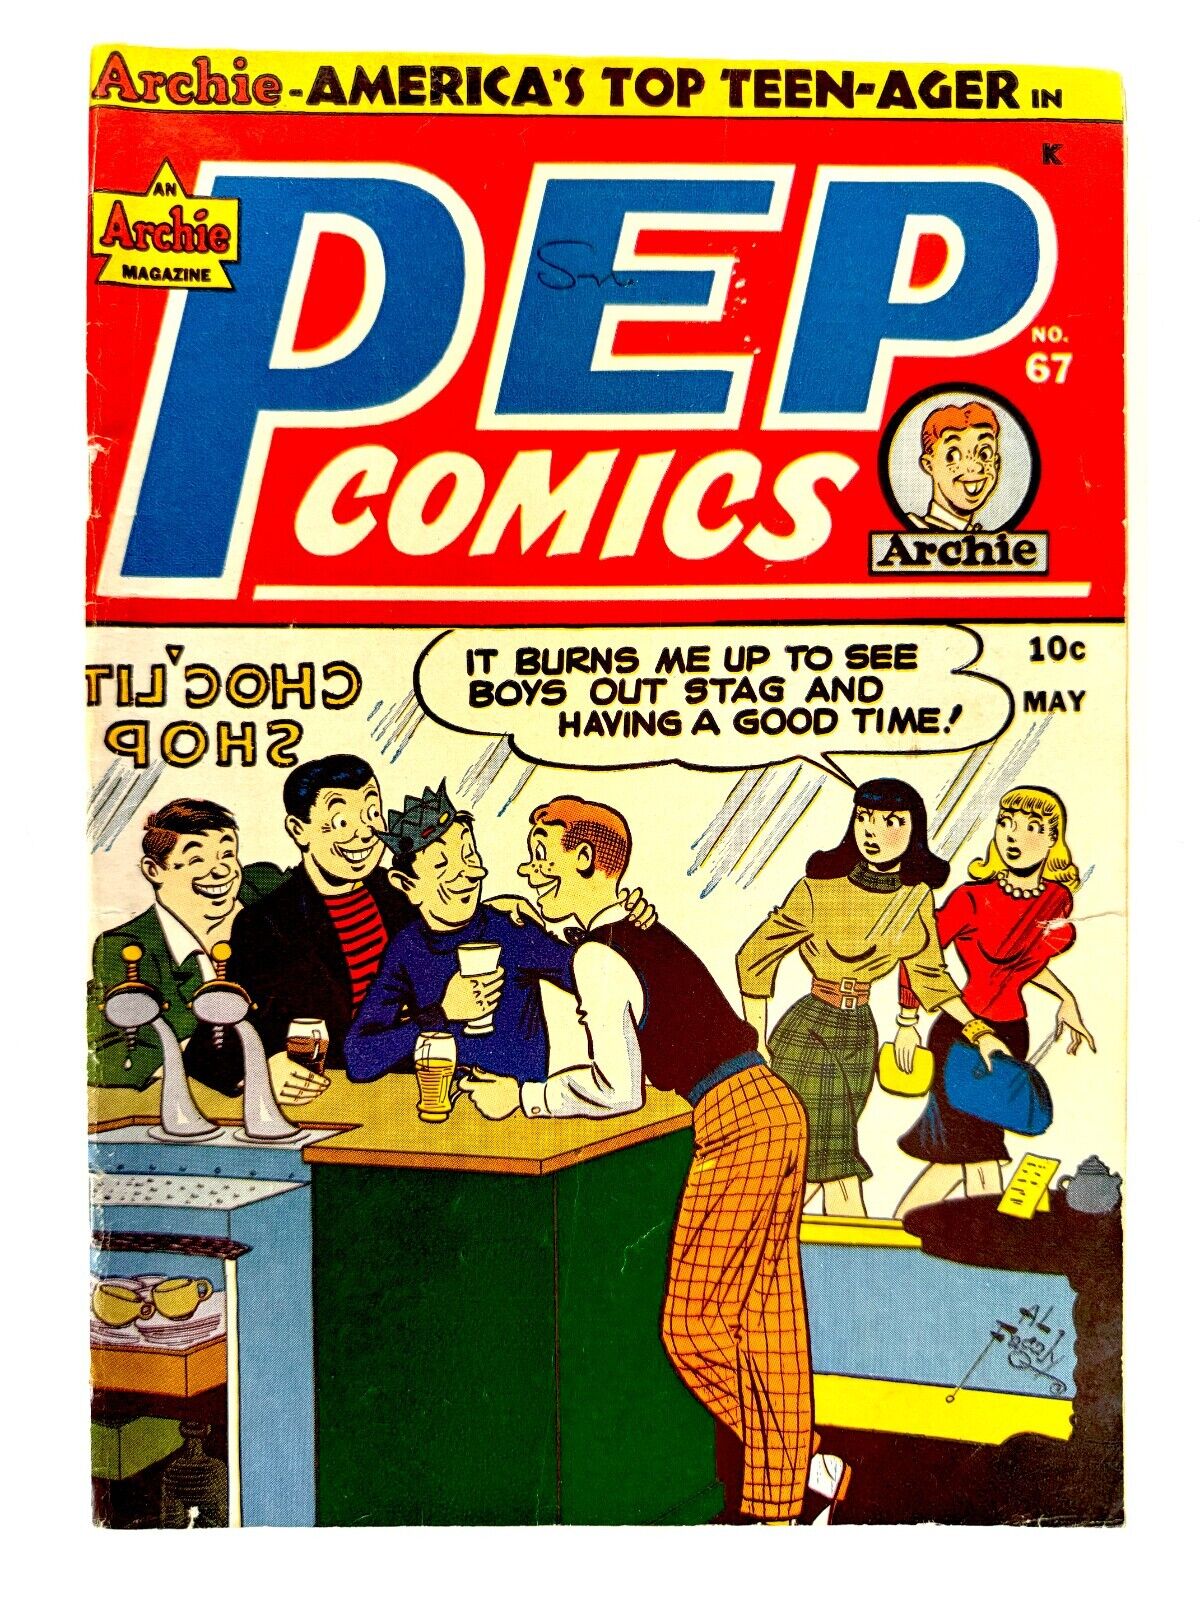 Archie PEP COMICS (1948) #67 BETTY VERONICA Golden Age VG Ships FREE